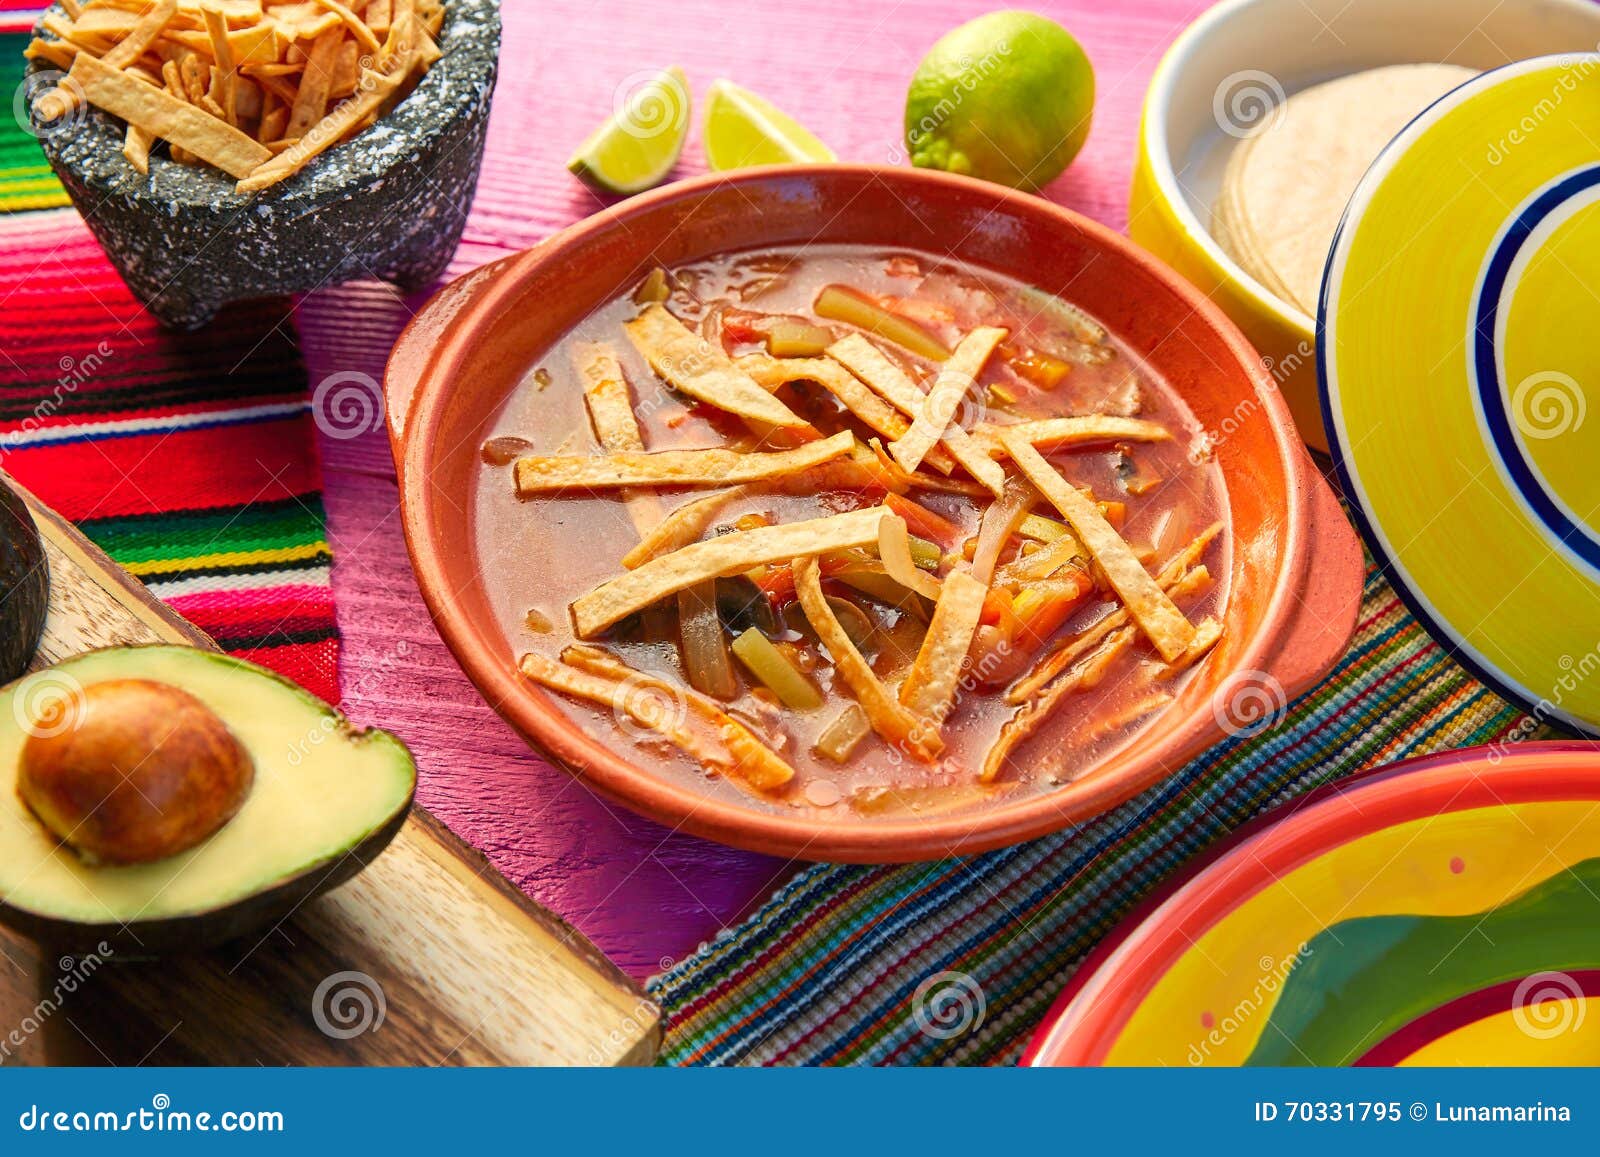 mexican tortilla soup and aguacate